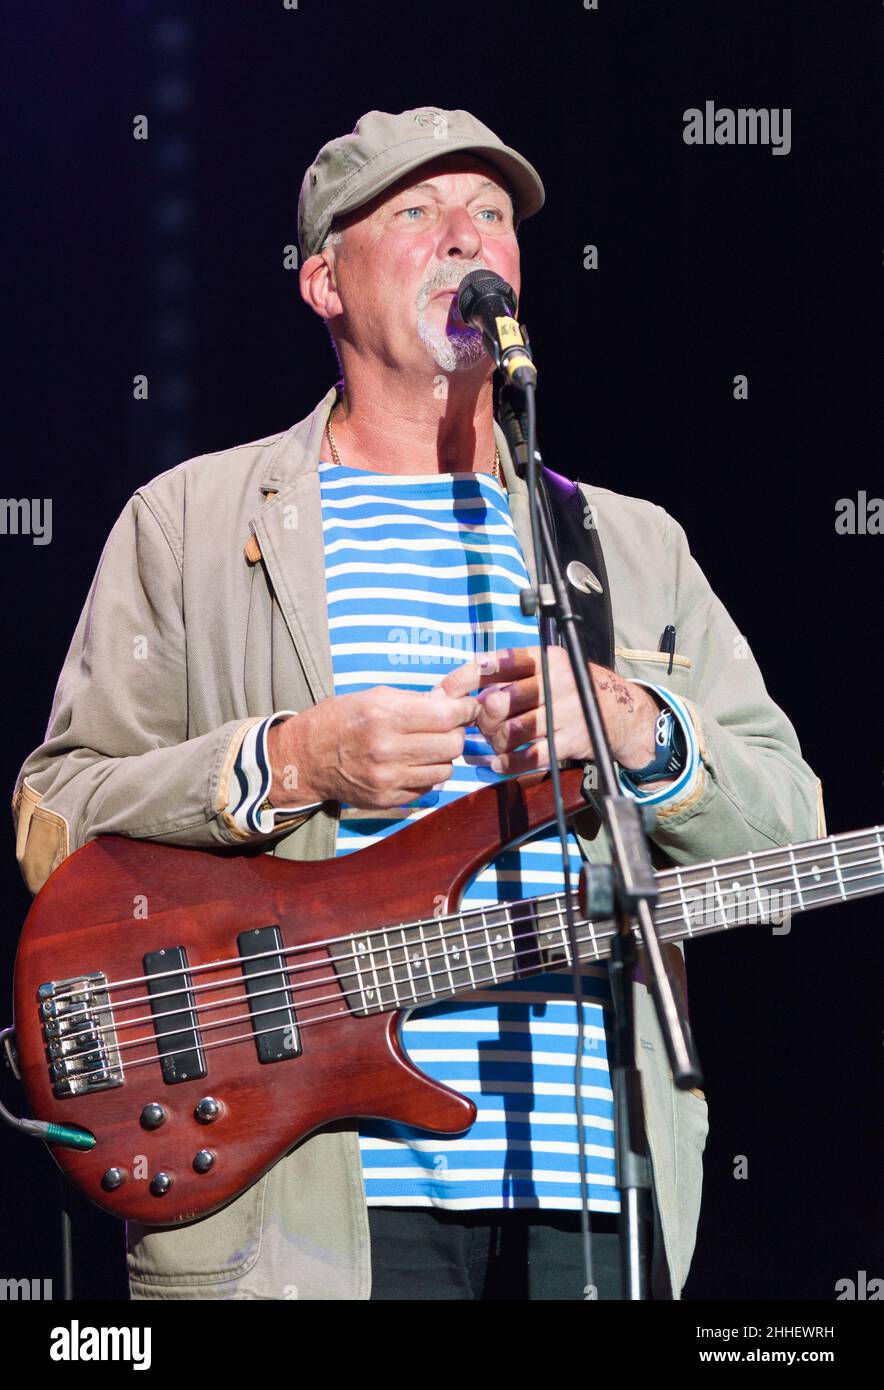 Dave Pegg of Fairport Convention performing at the band's Cropredy Convention, UK in 2012 Stock Photo